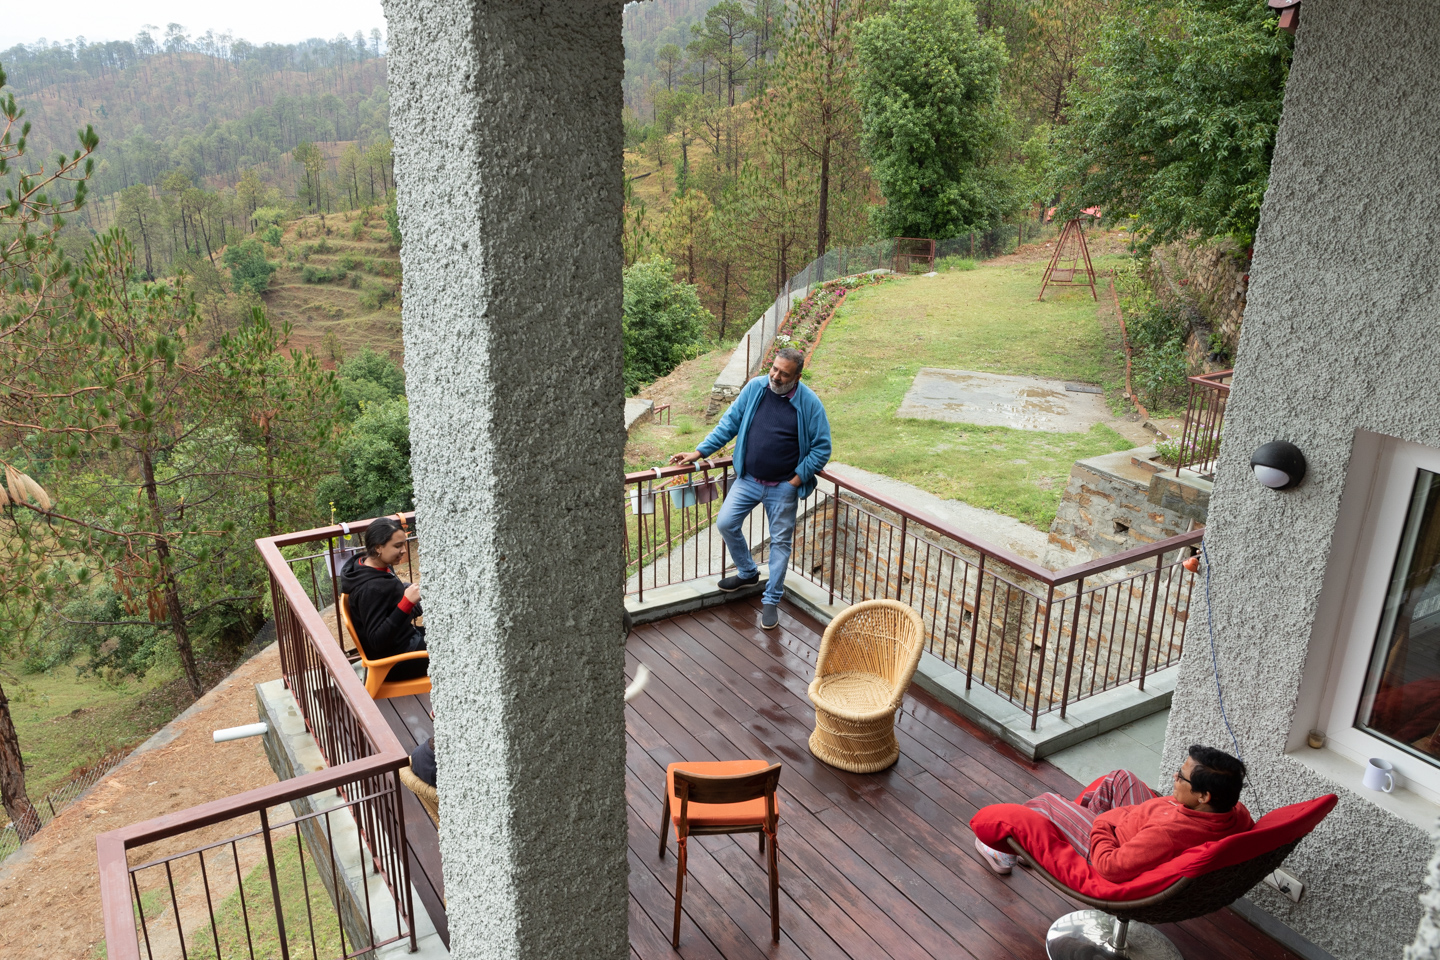 The wooden deck with a view of the forest